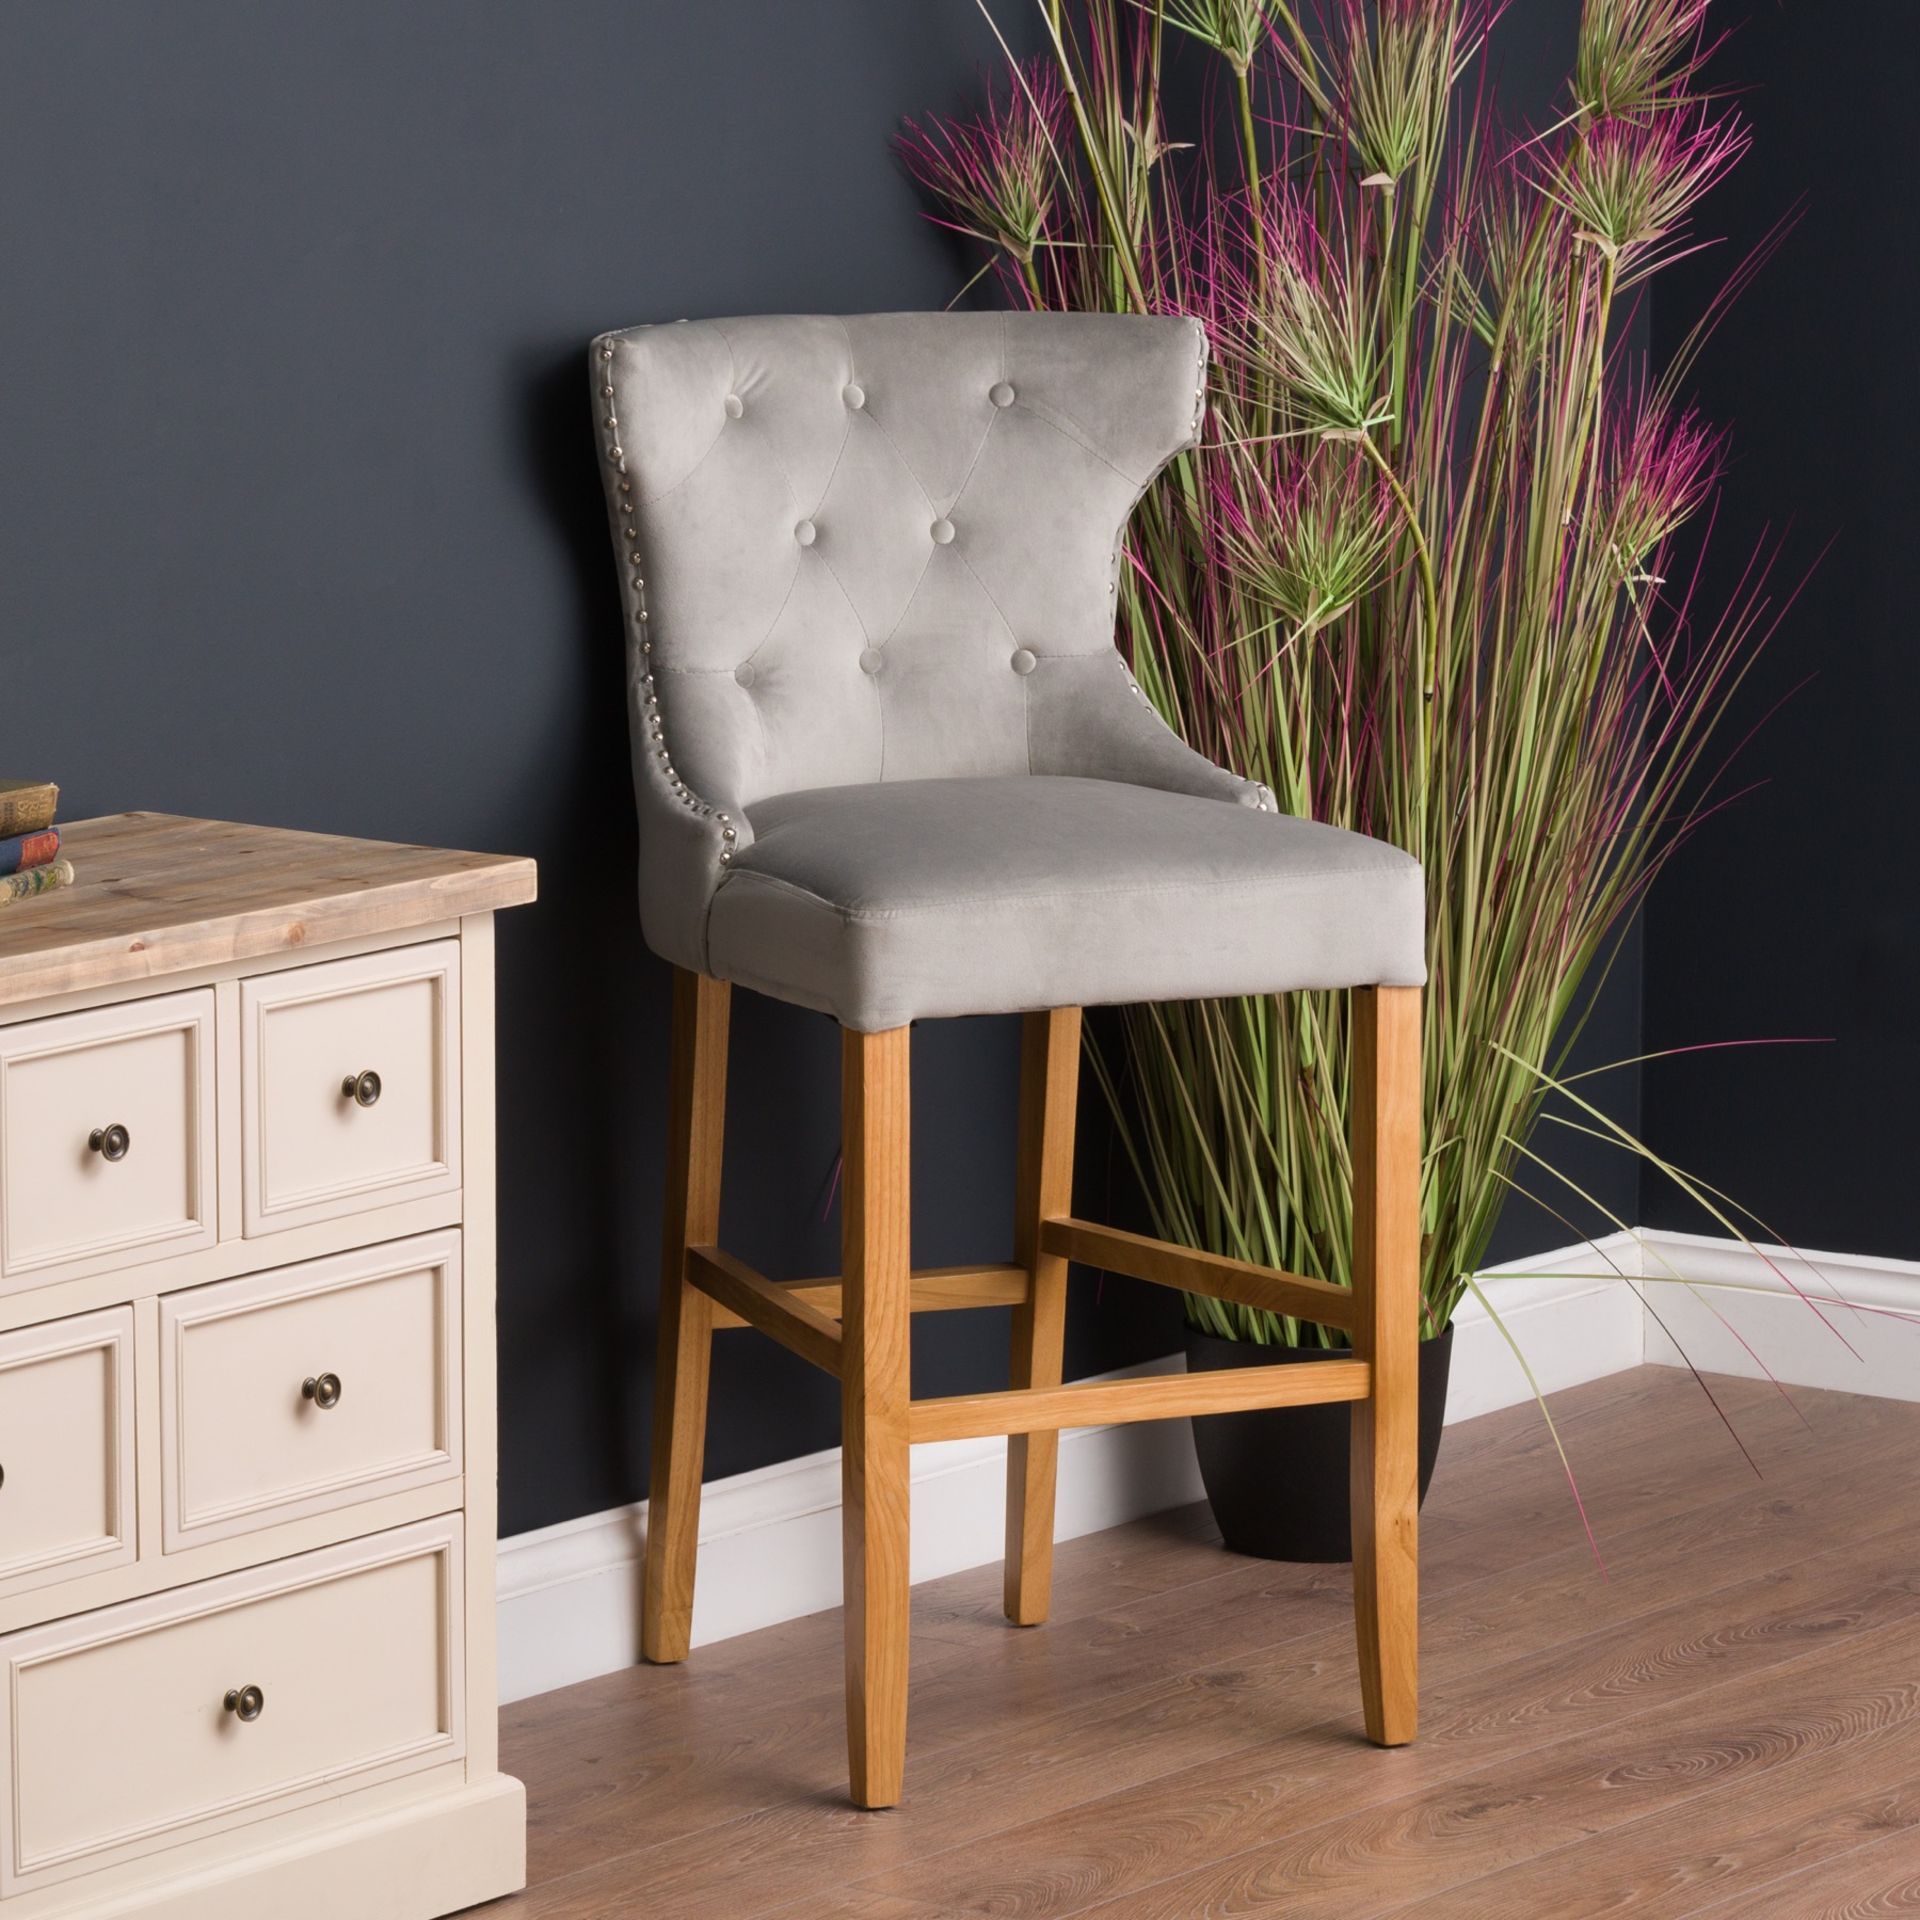 Barisa Grey Velvet Tufted High Bar Stool, At 115cm High, 64cm Wide And 55cm Deep This Makes An Ideal